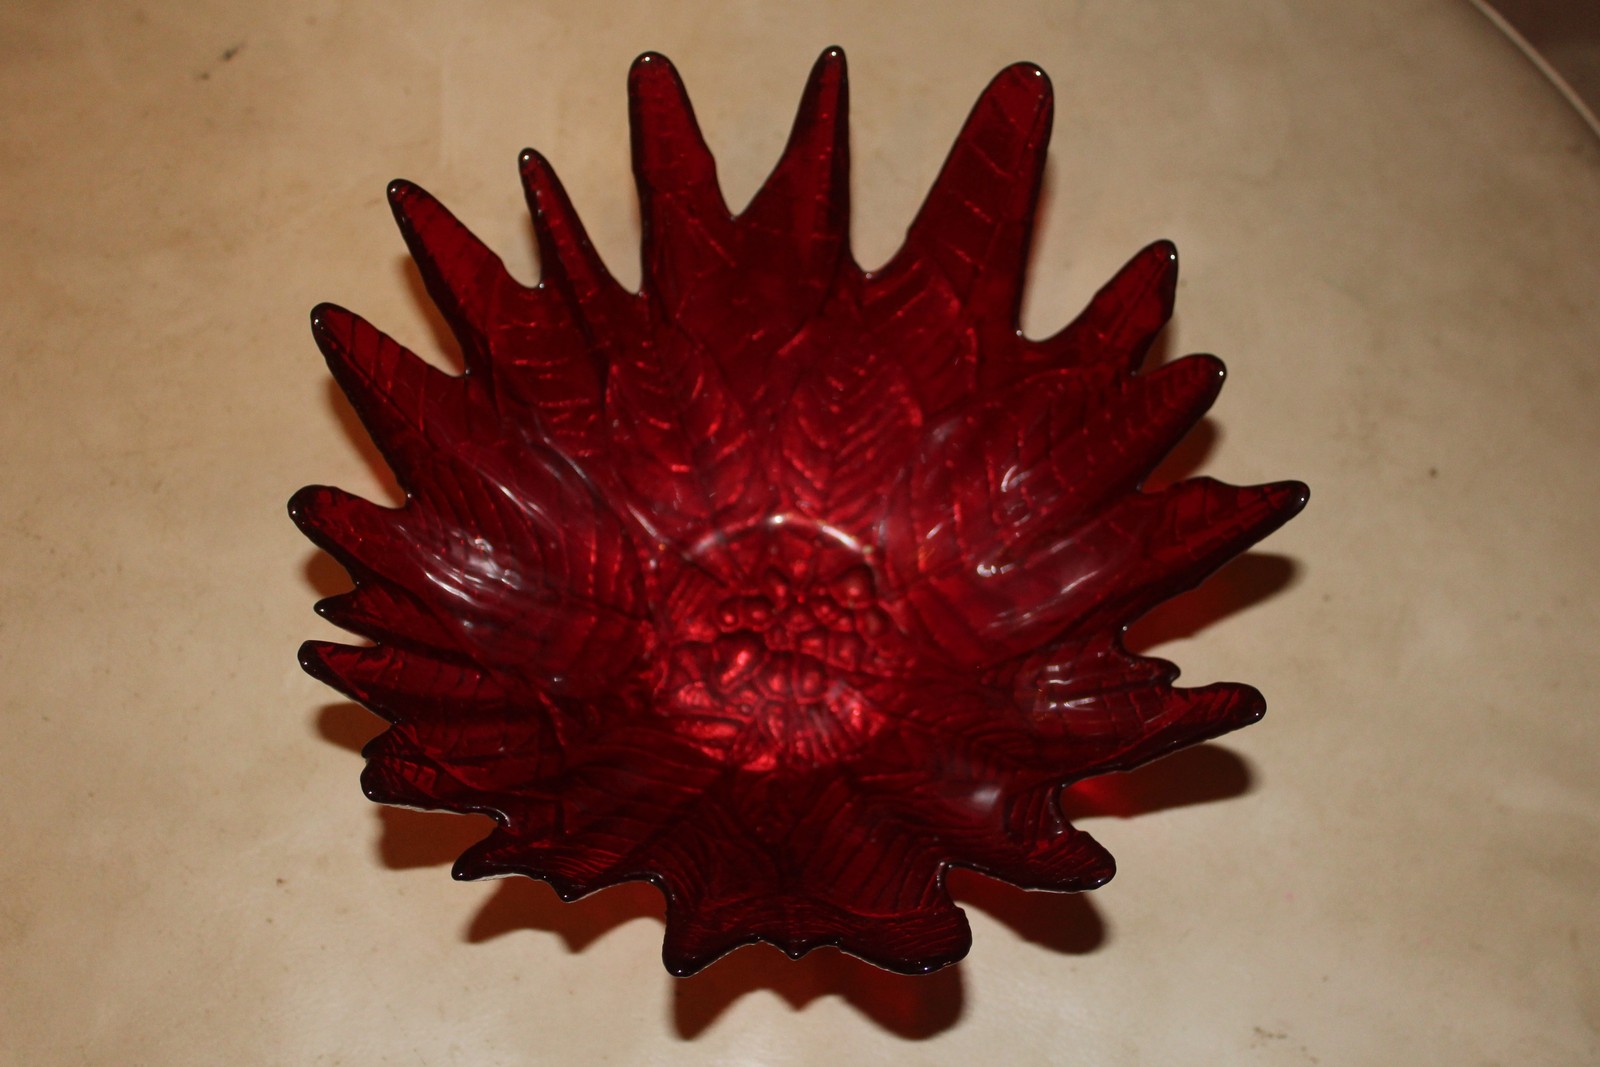 Red bowl with petals - $10.00